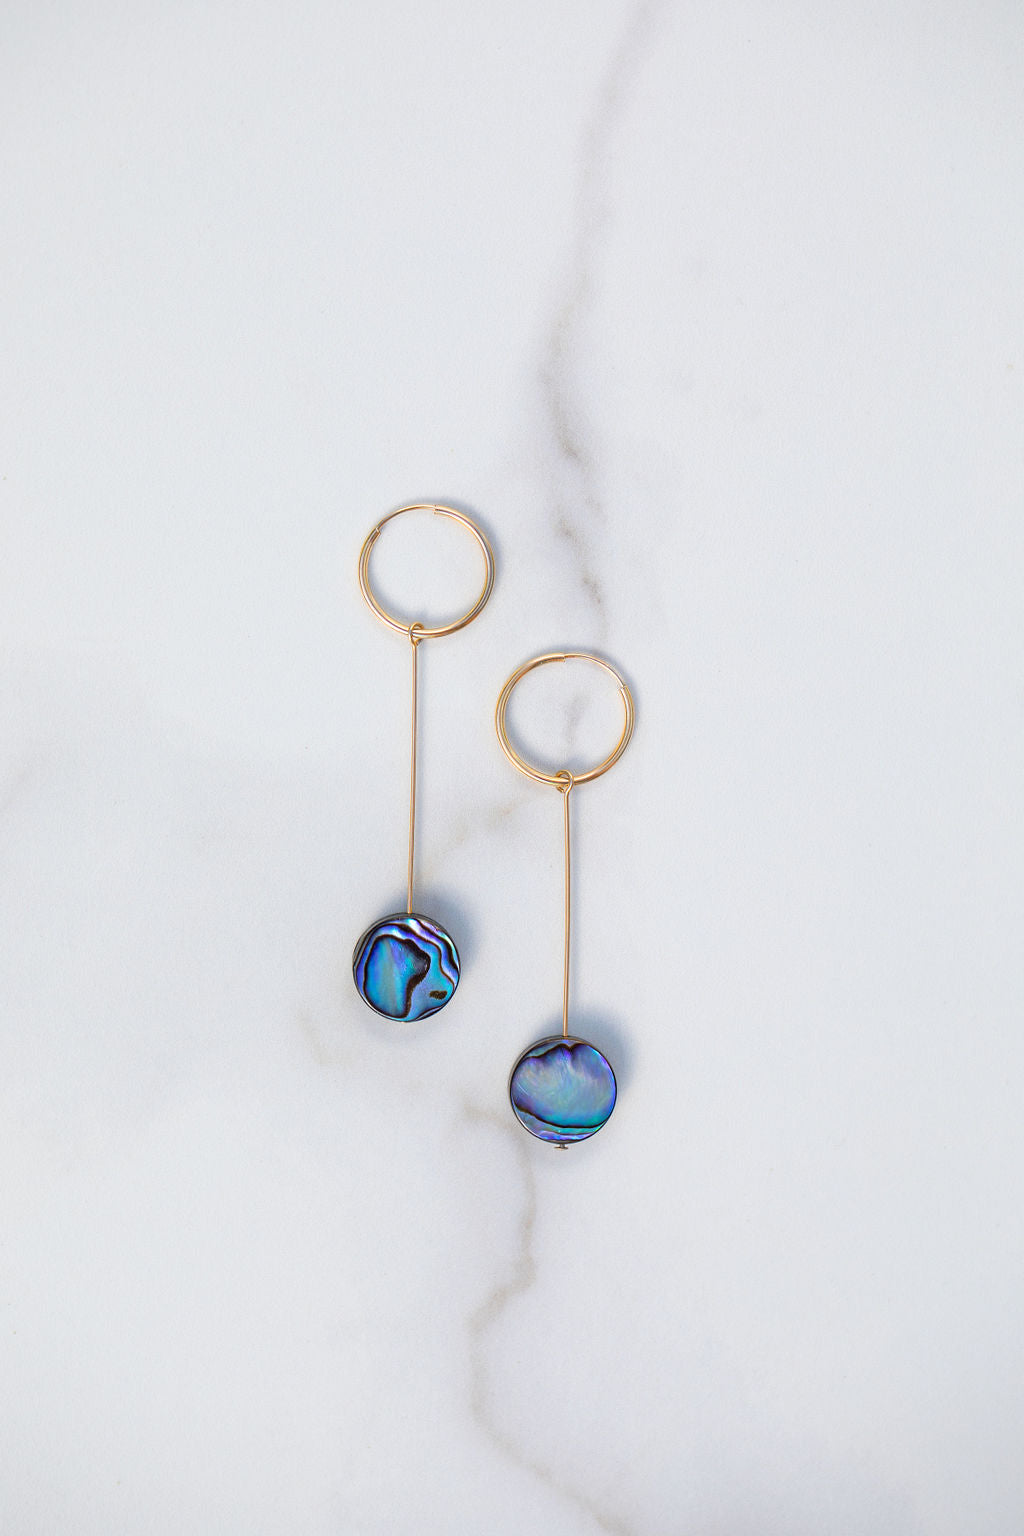 Minimalism from the Sea Iridescence Abalone Shell Discs on 14k gold fill wire & hoops. These hang down about 2".